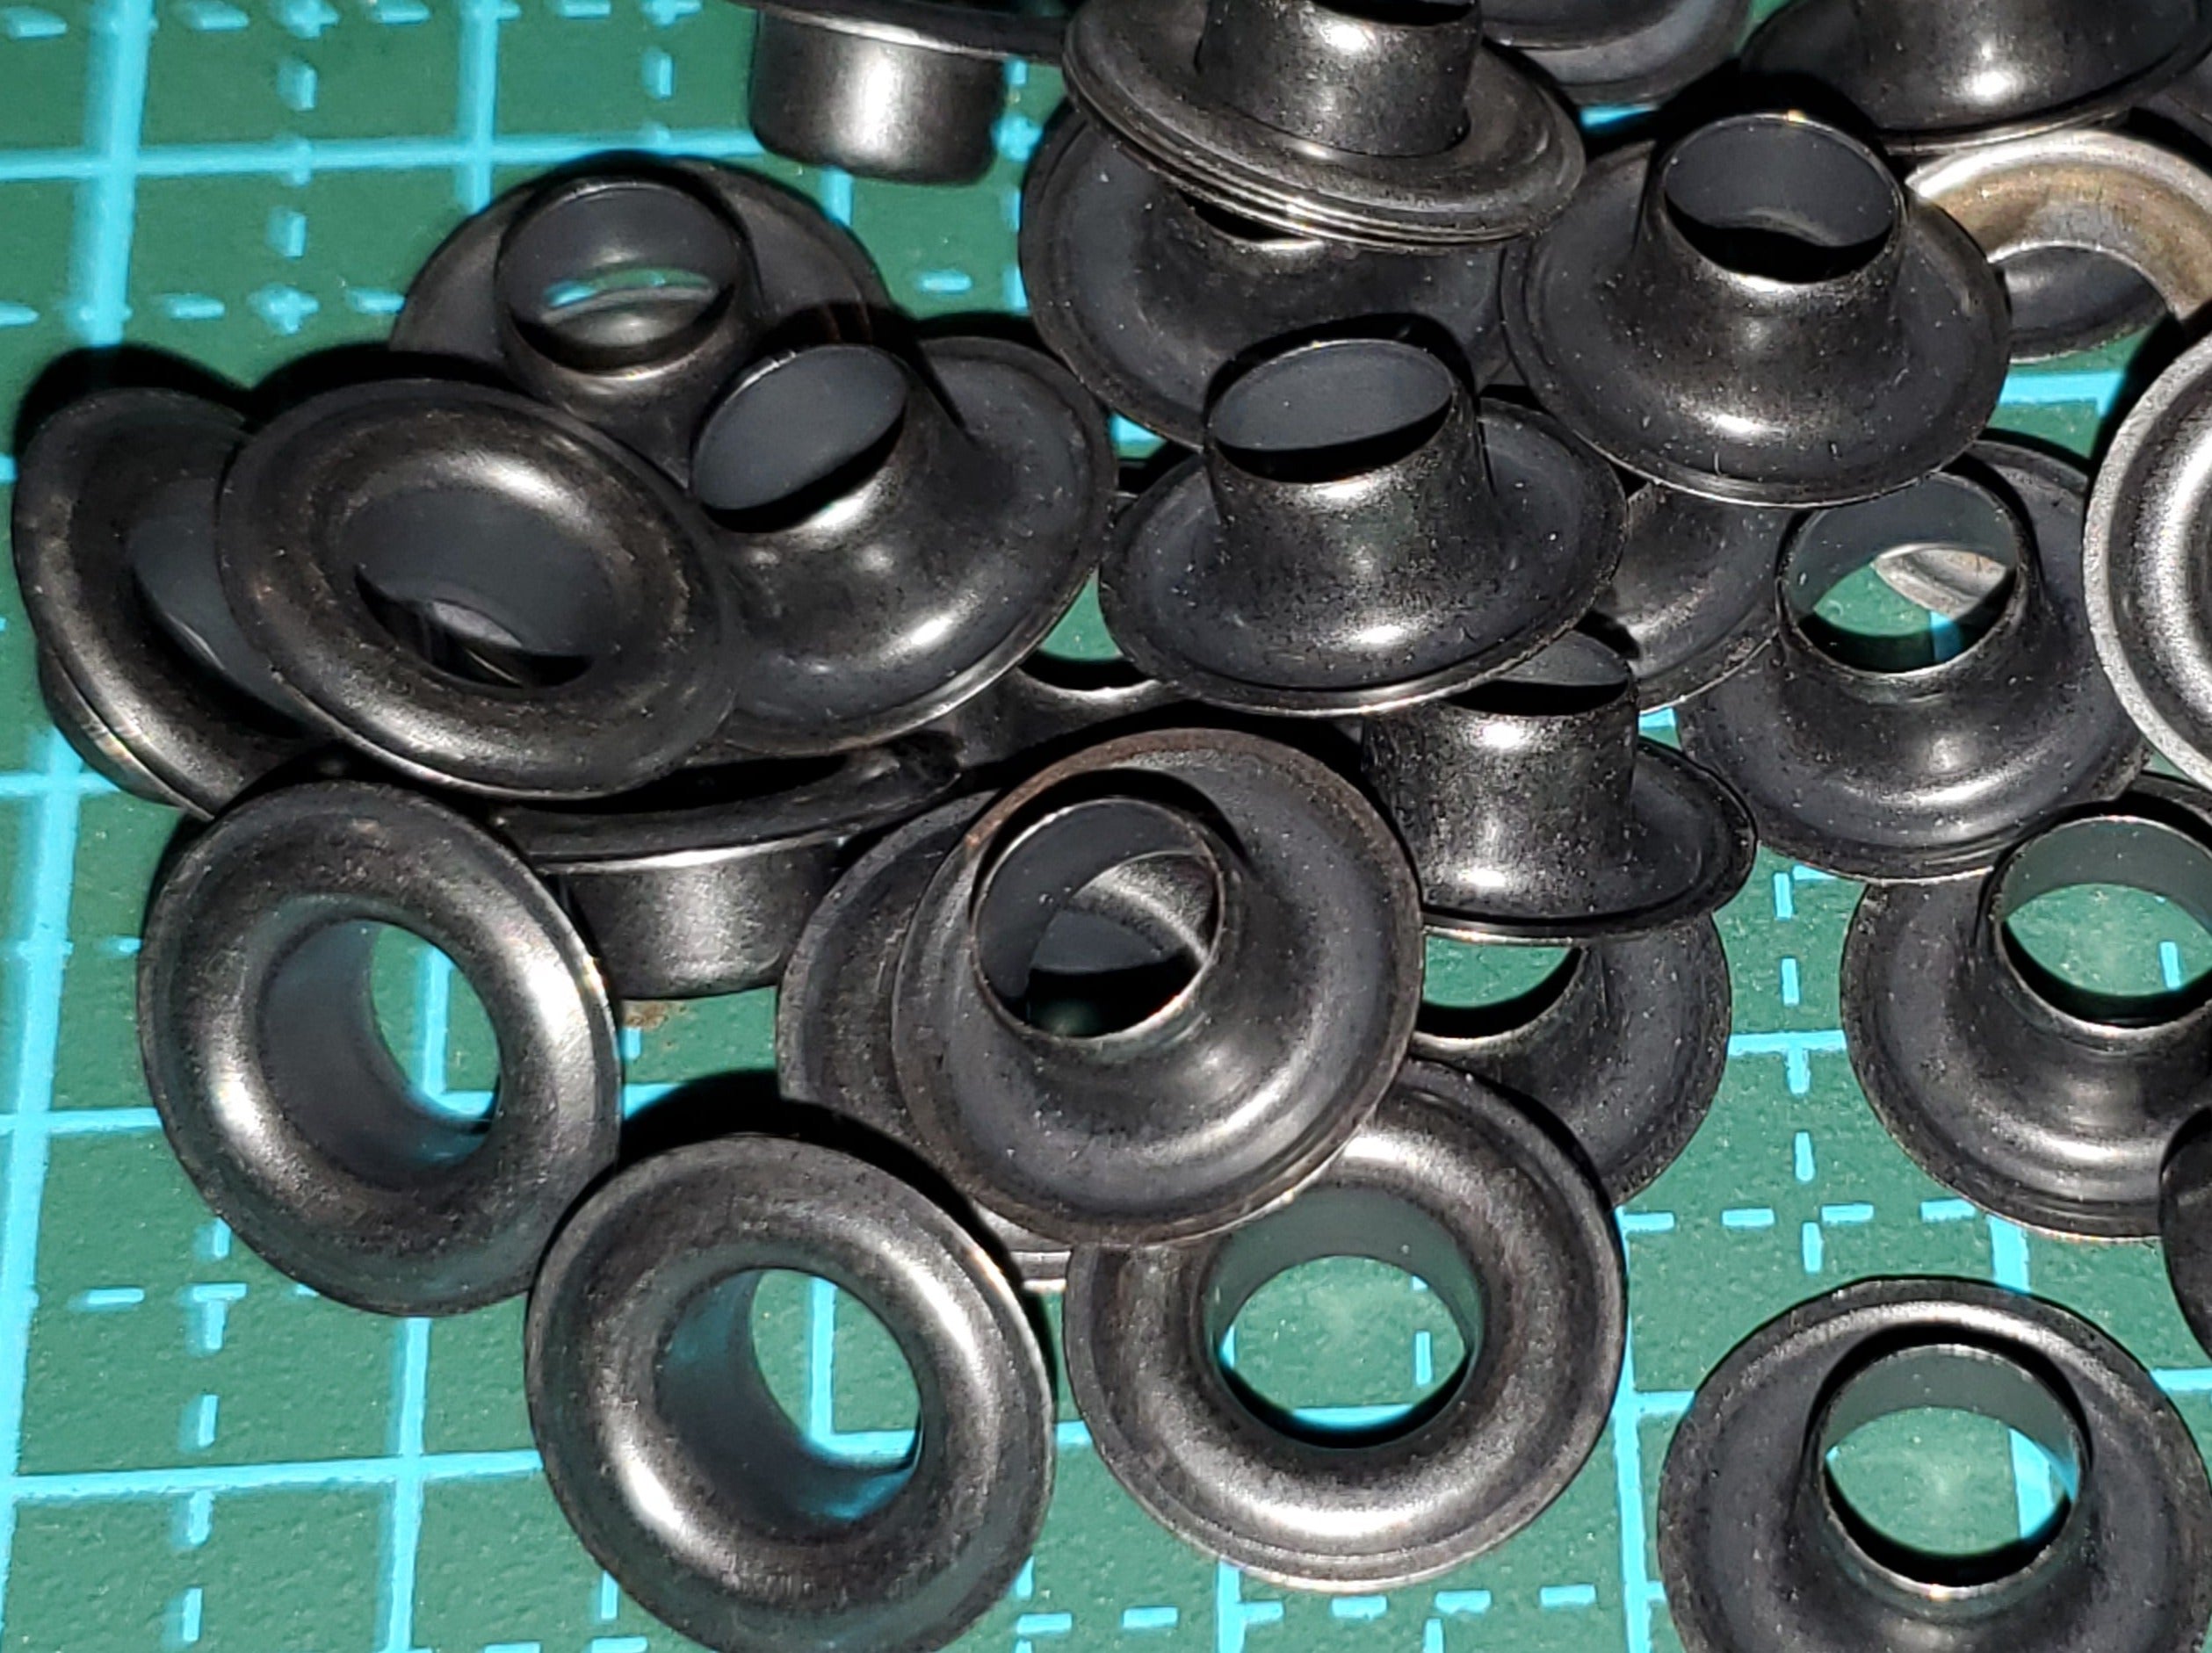 Boot / Shoe Grommets with Washer in Mat Black - Size 0 x 100sets - Allied Trimmings Inc